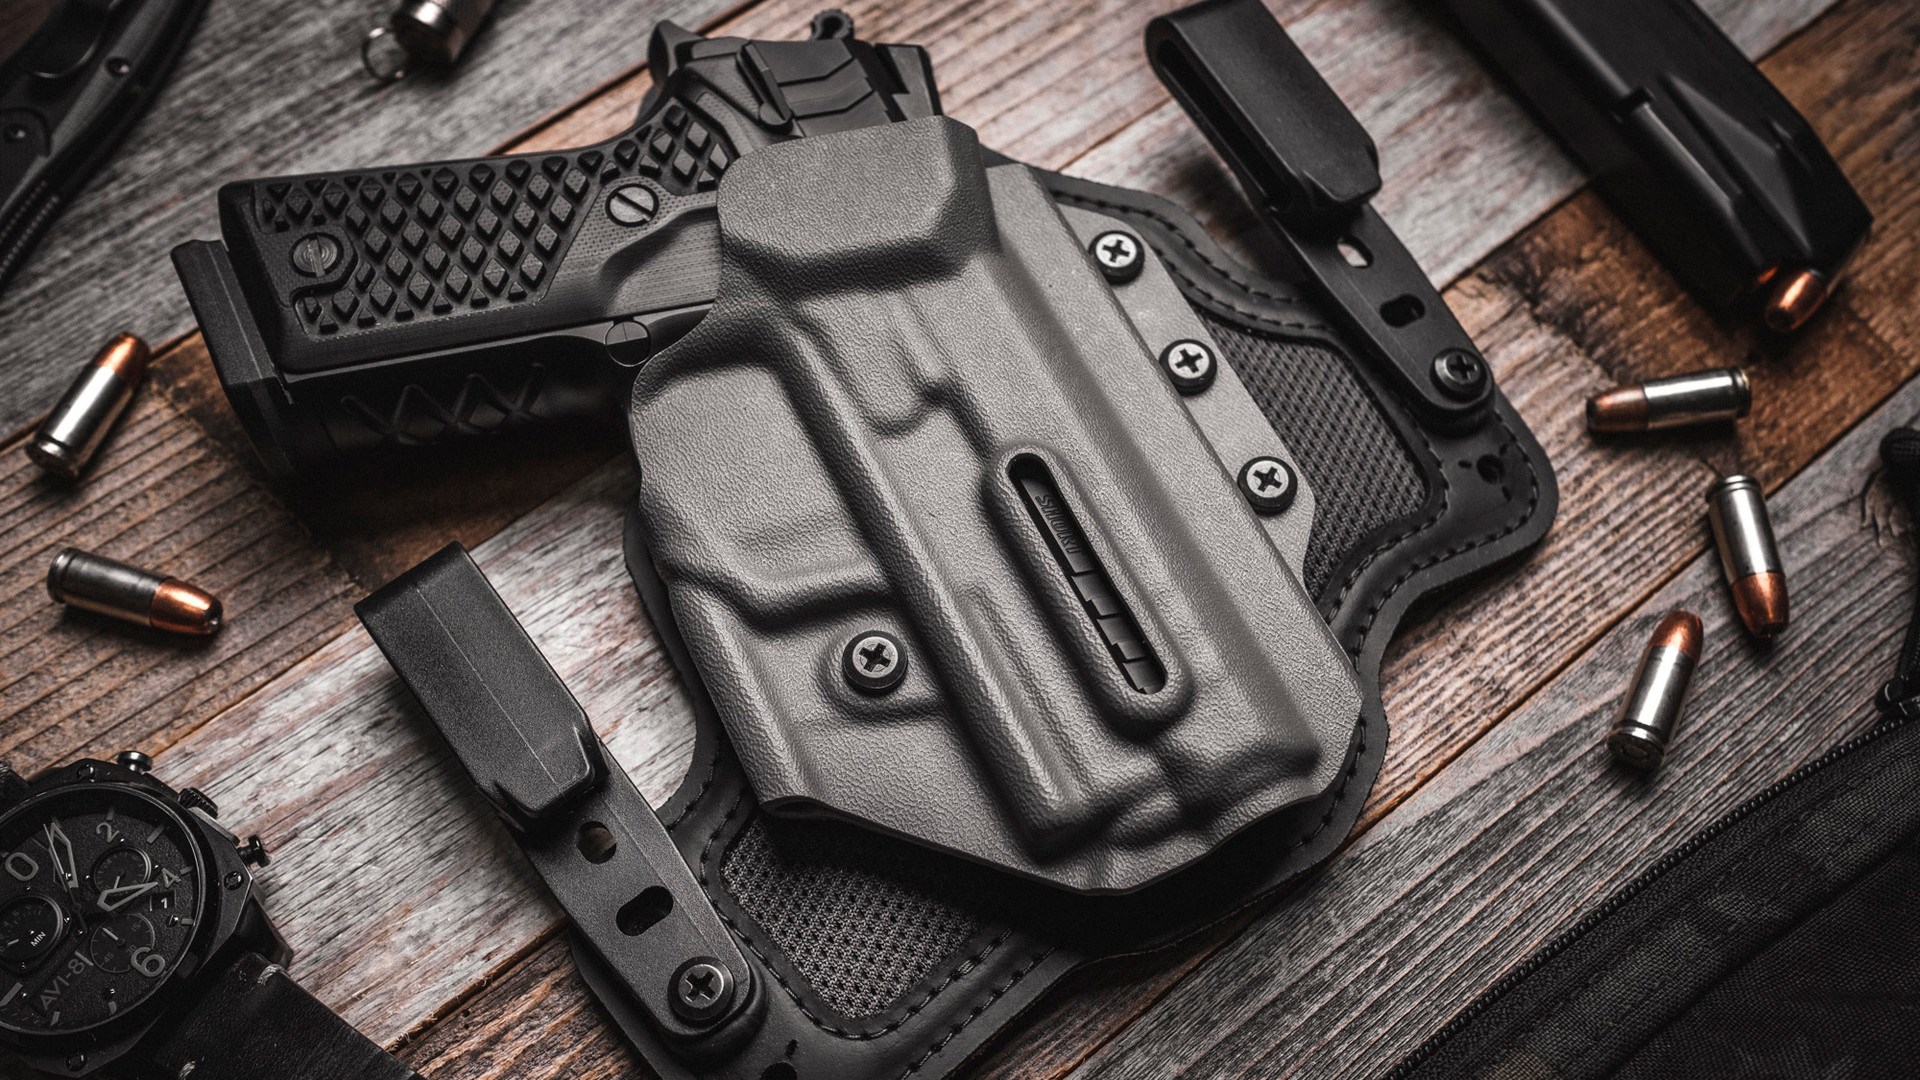 Lionheart Vulcan 9 shown inside a holster surrounded by loose rounds and loaded magazines.